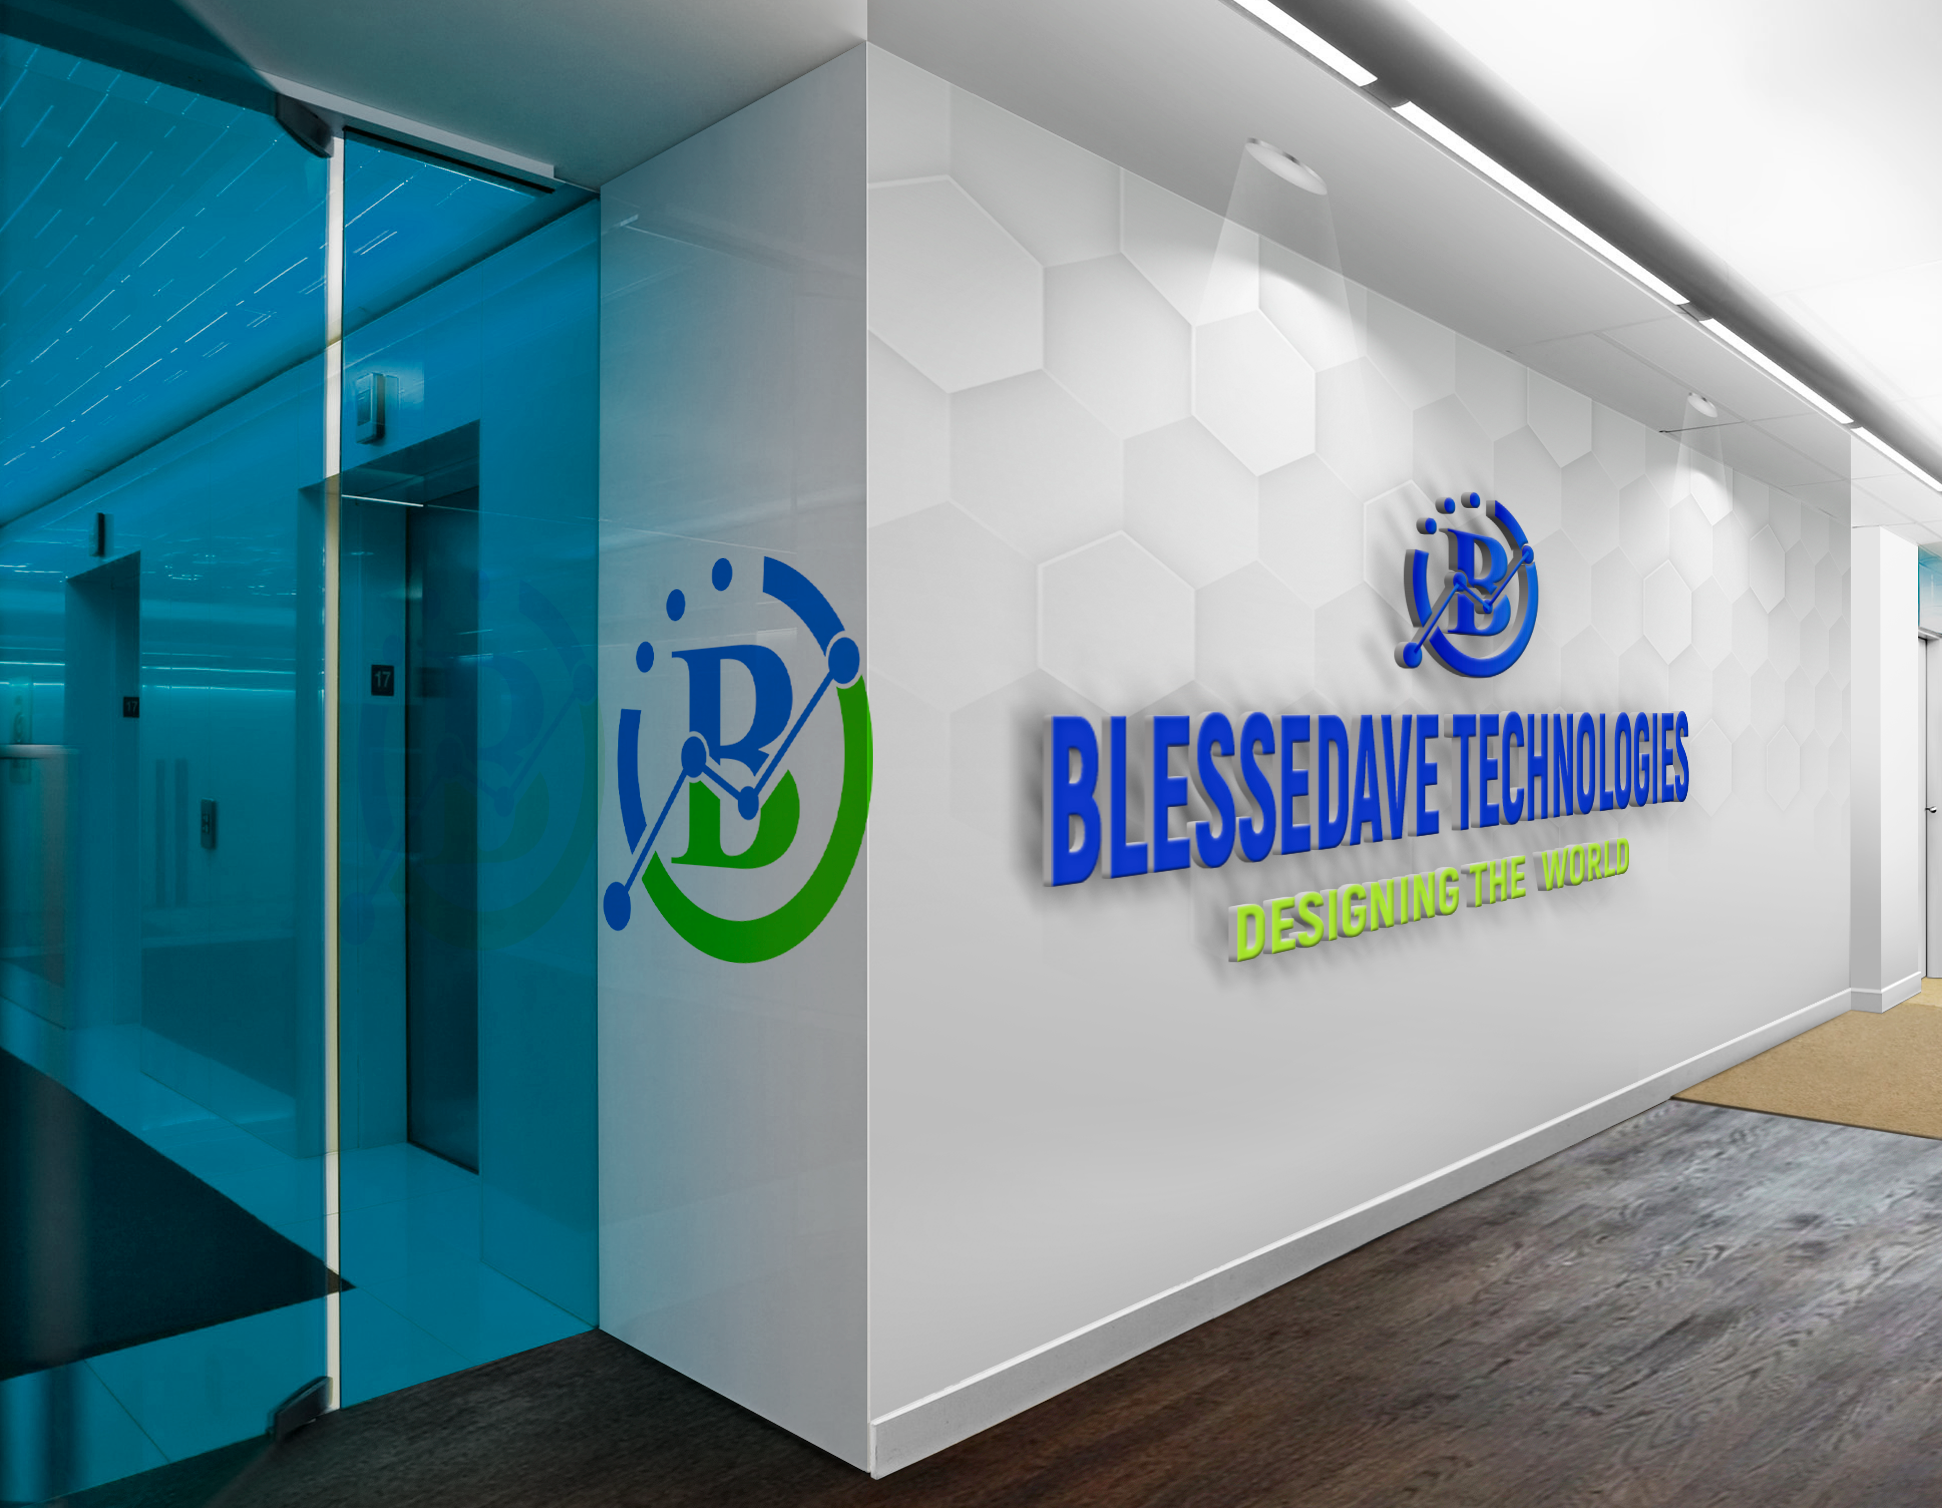 Blessedave Technologies